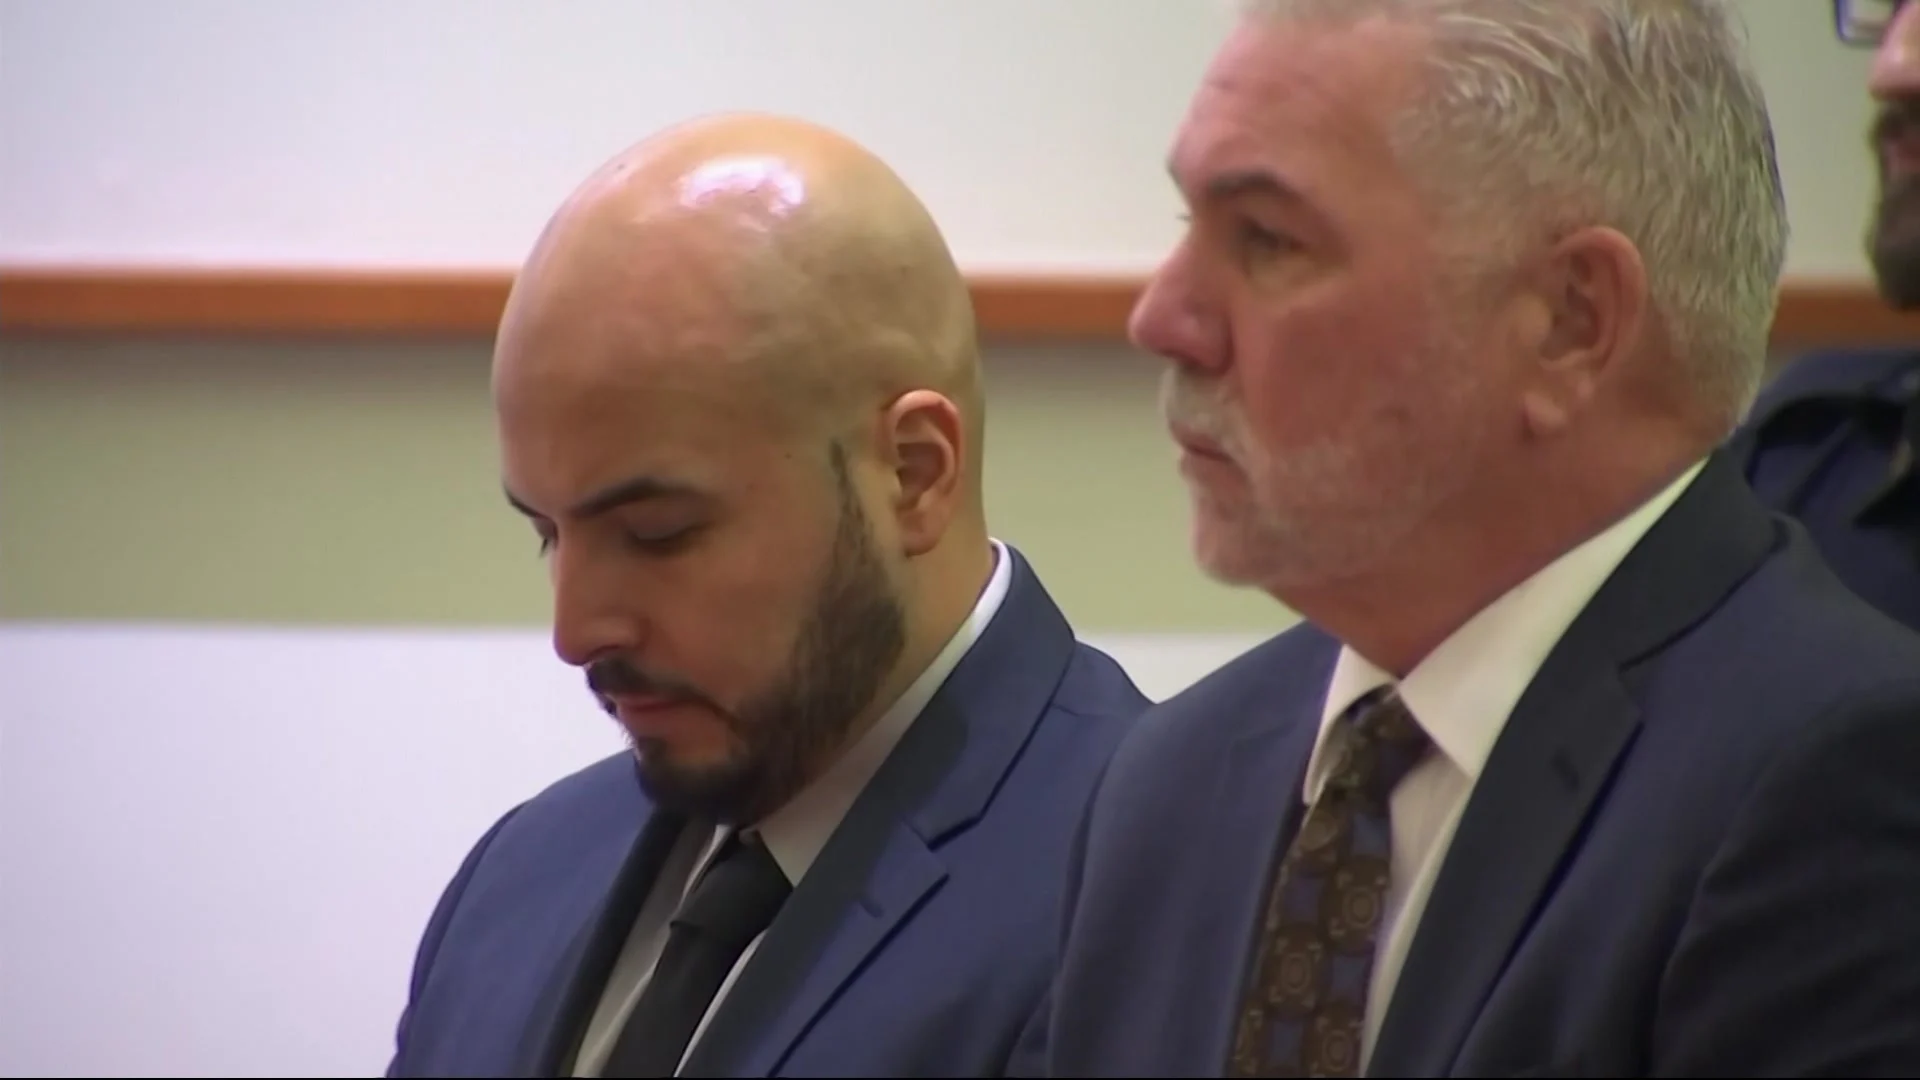 NYPD officer accused of causing fatal crash in Kingsbridge Heights back in court